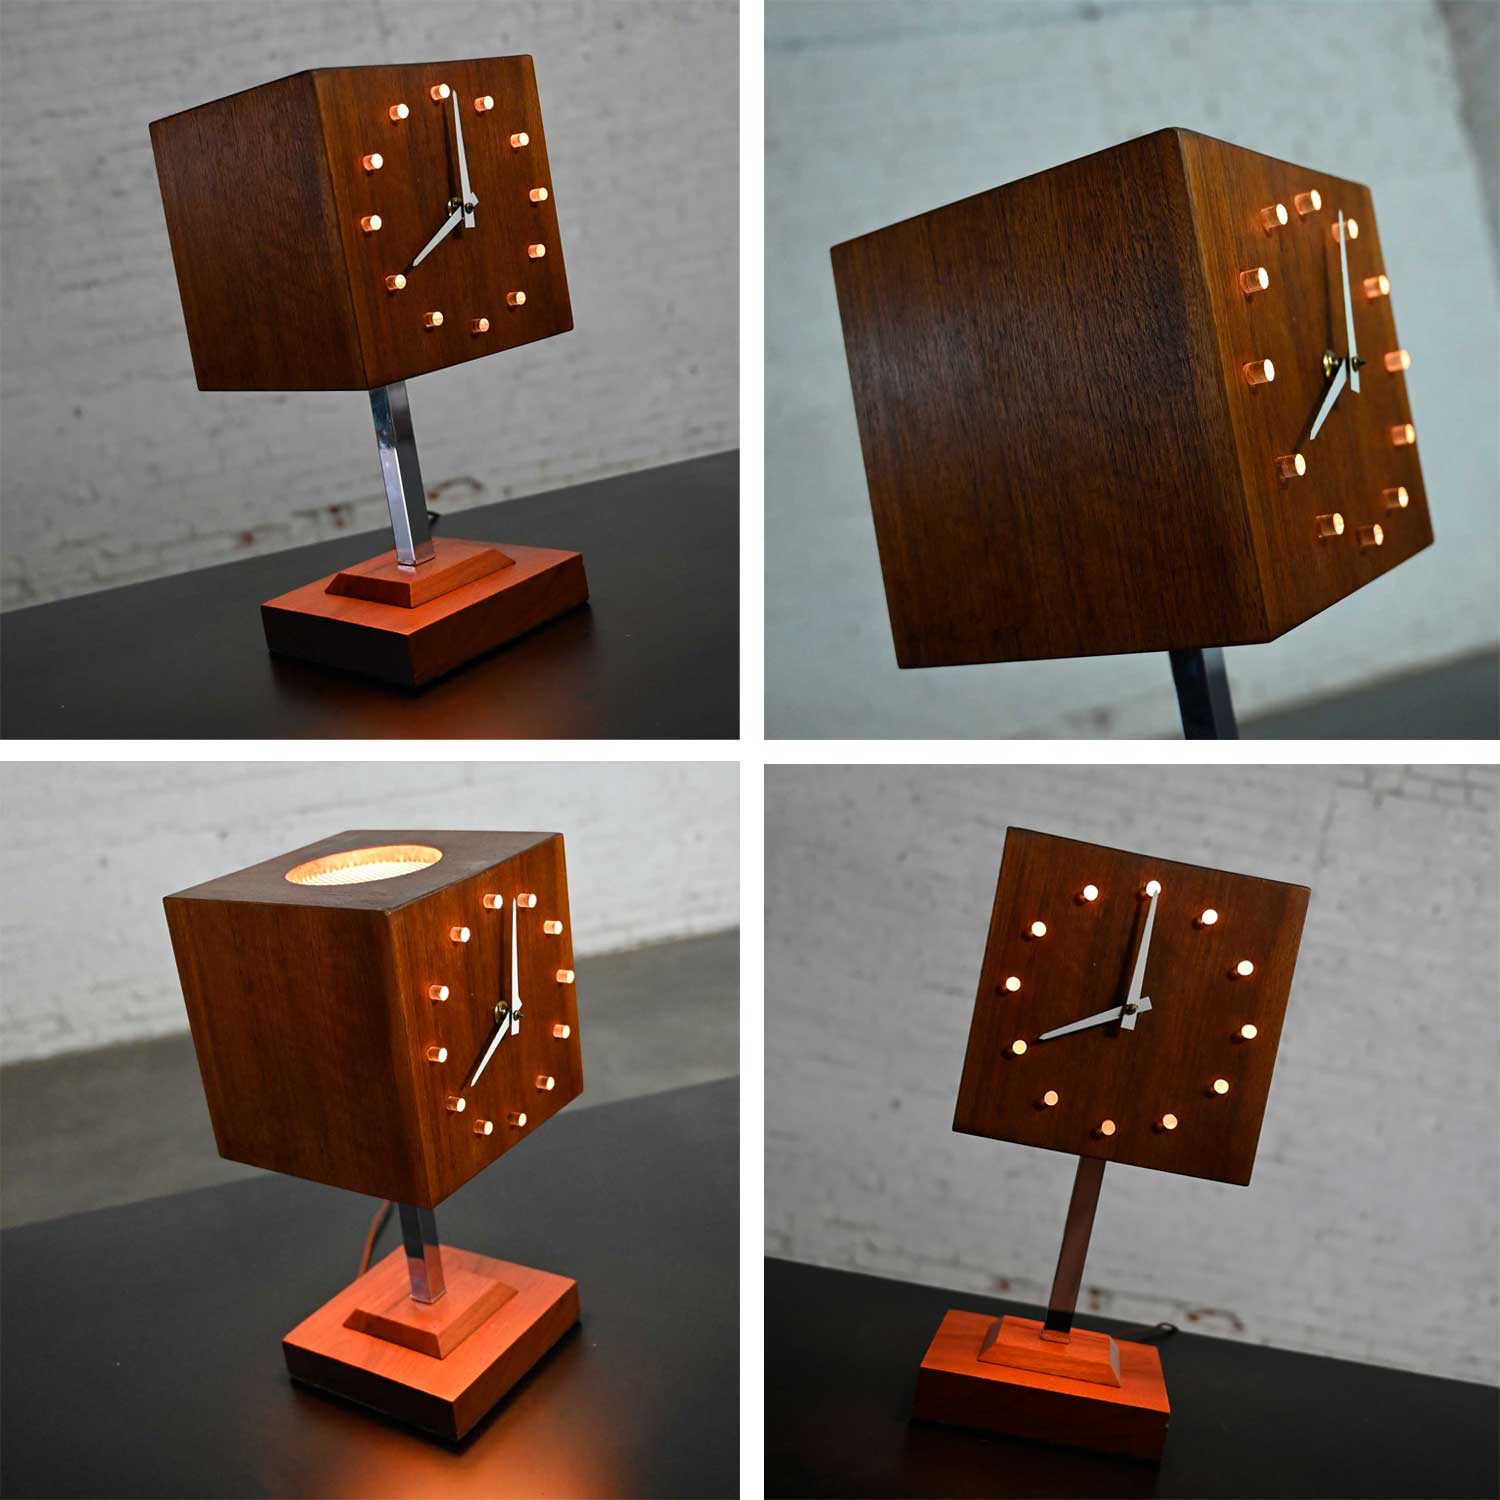 Mid-Century Modern Walnut & Chrome Cube Clock Lamp on Stand by V. H. Woolums Style of Howard Miller Clocks